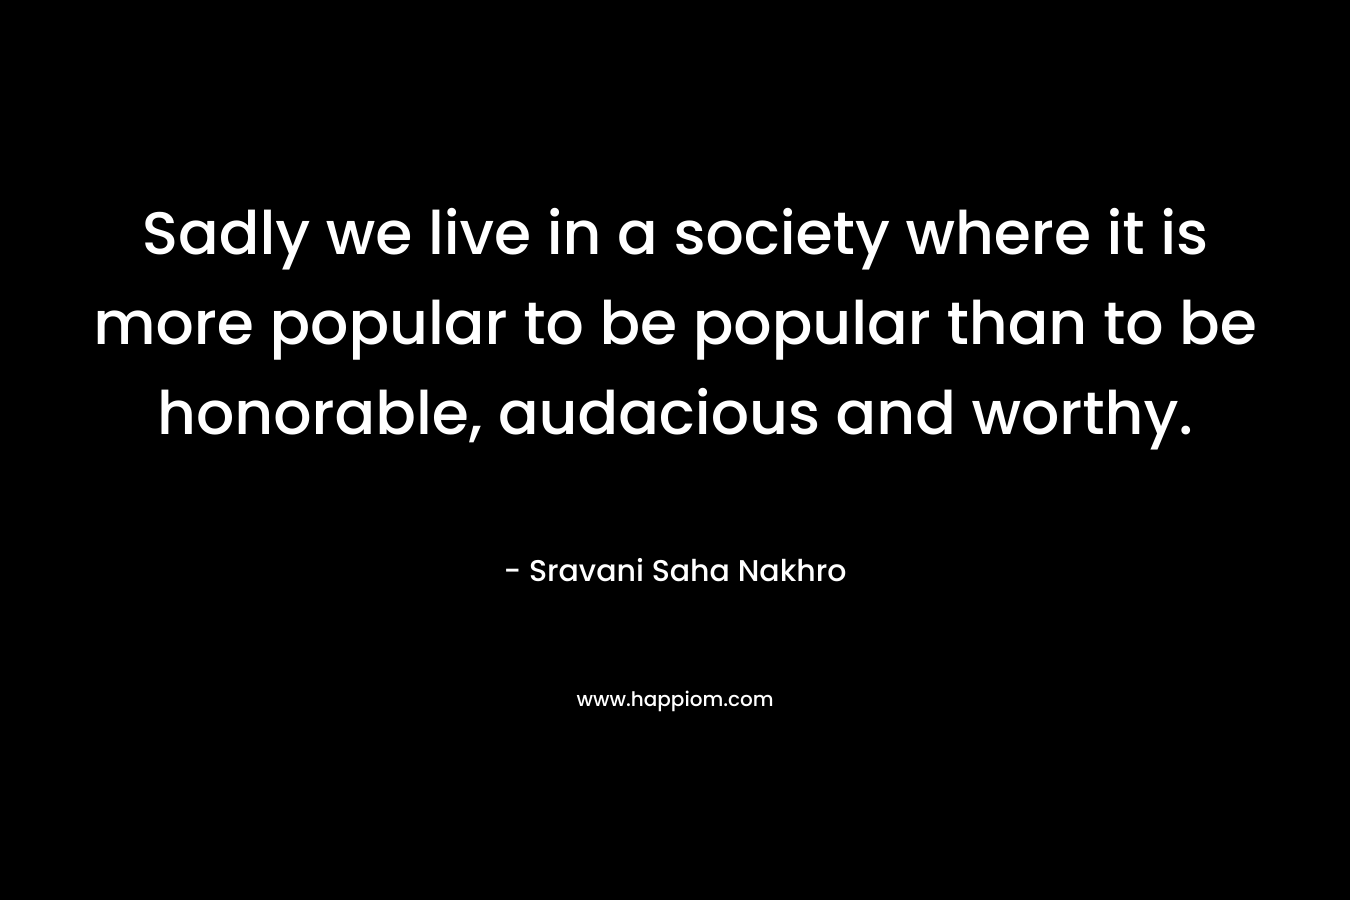 Sadly we live in a society where it is more popular to be popular than to be honorable, audacious and worthy.